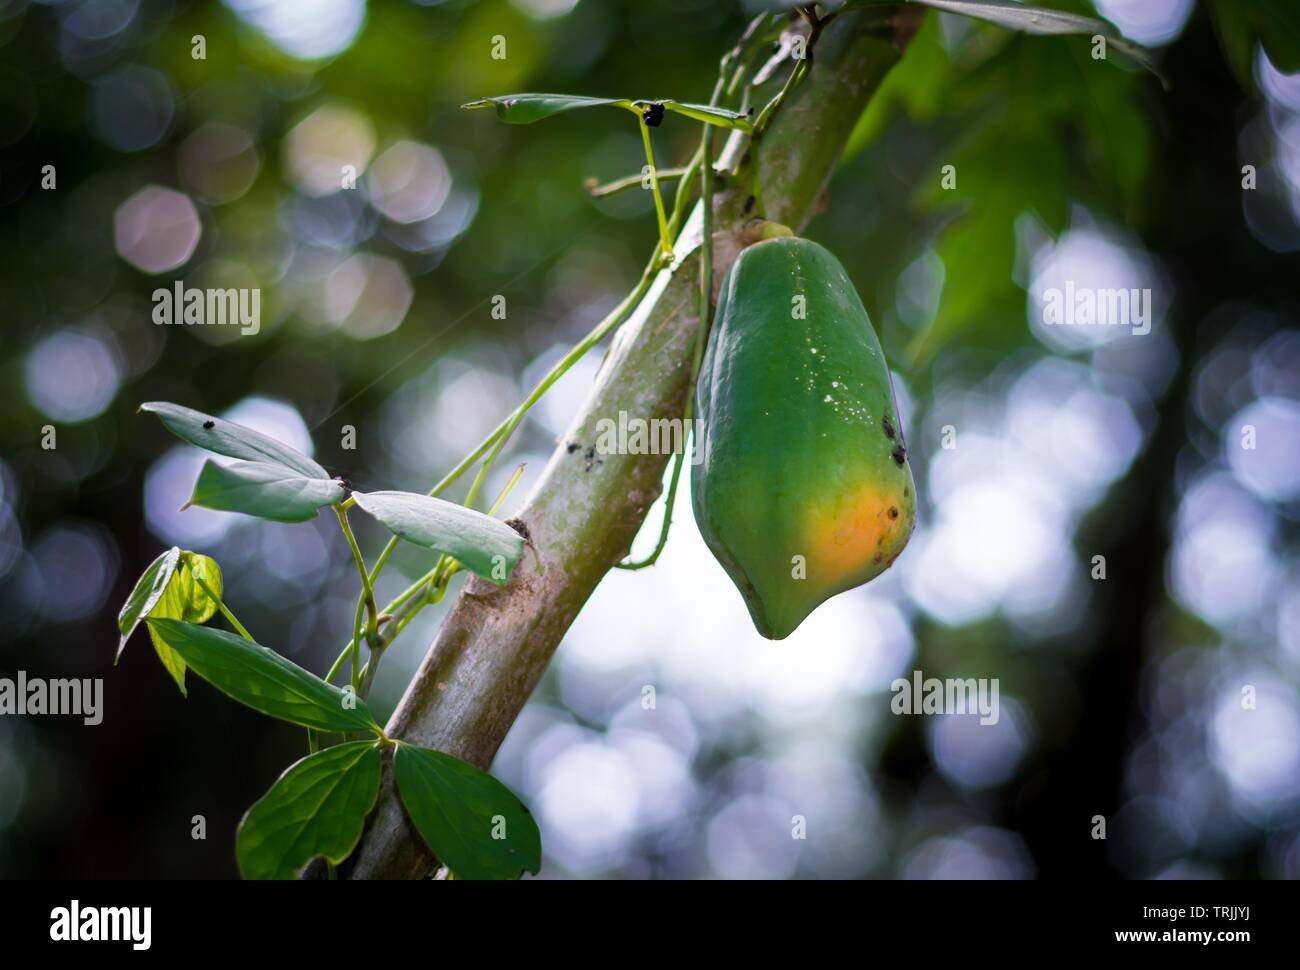 Kerala, India - May 5, 2019: The Papaya is the plant Carica Papaya, one of the 22 accepted species in the genus Carica of the family Caricaceae. Its o Stock Photo